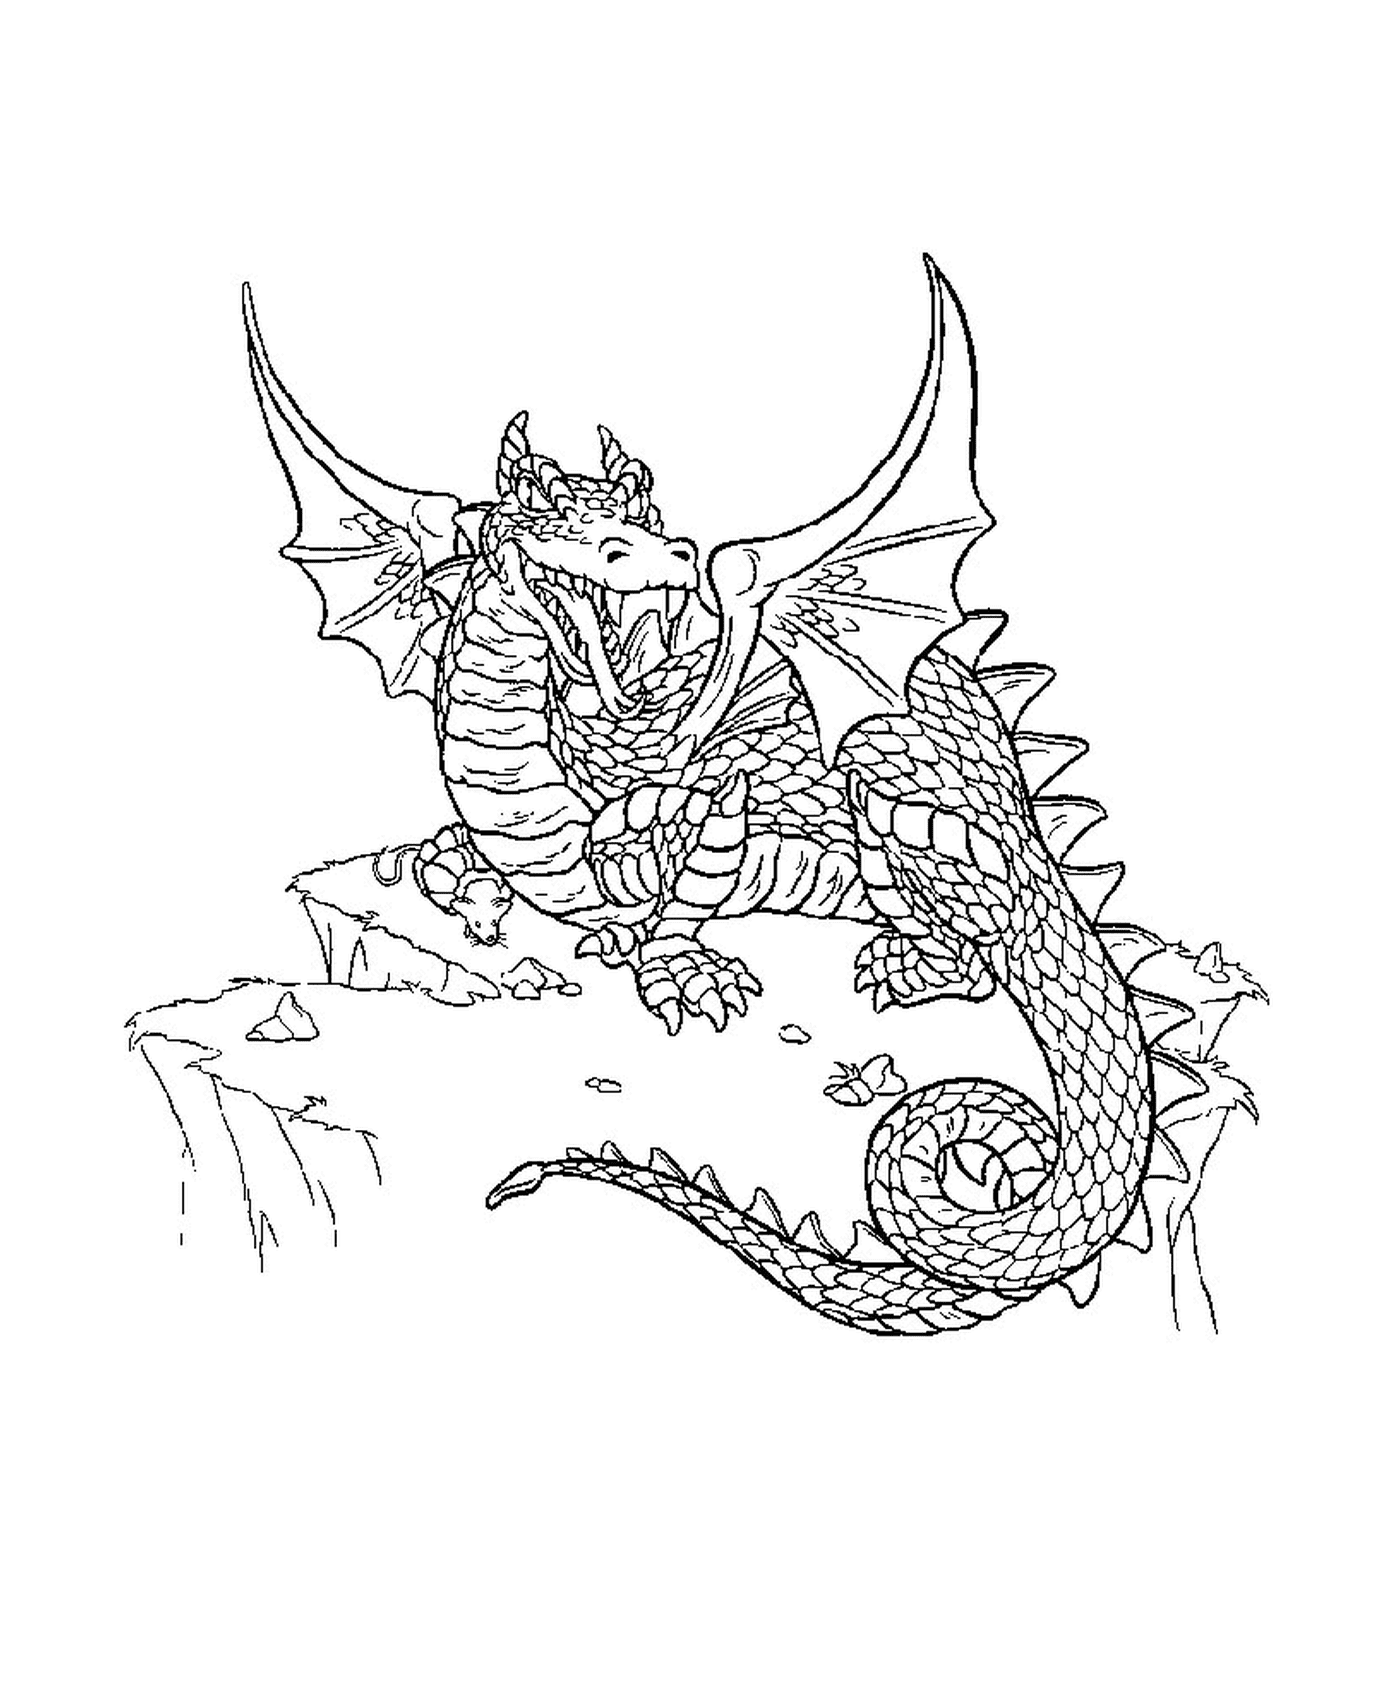  A dragon perched on a cliff 